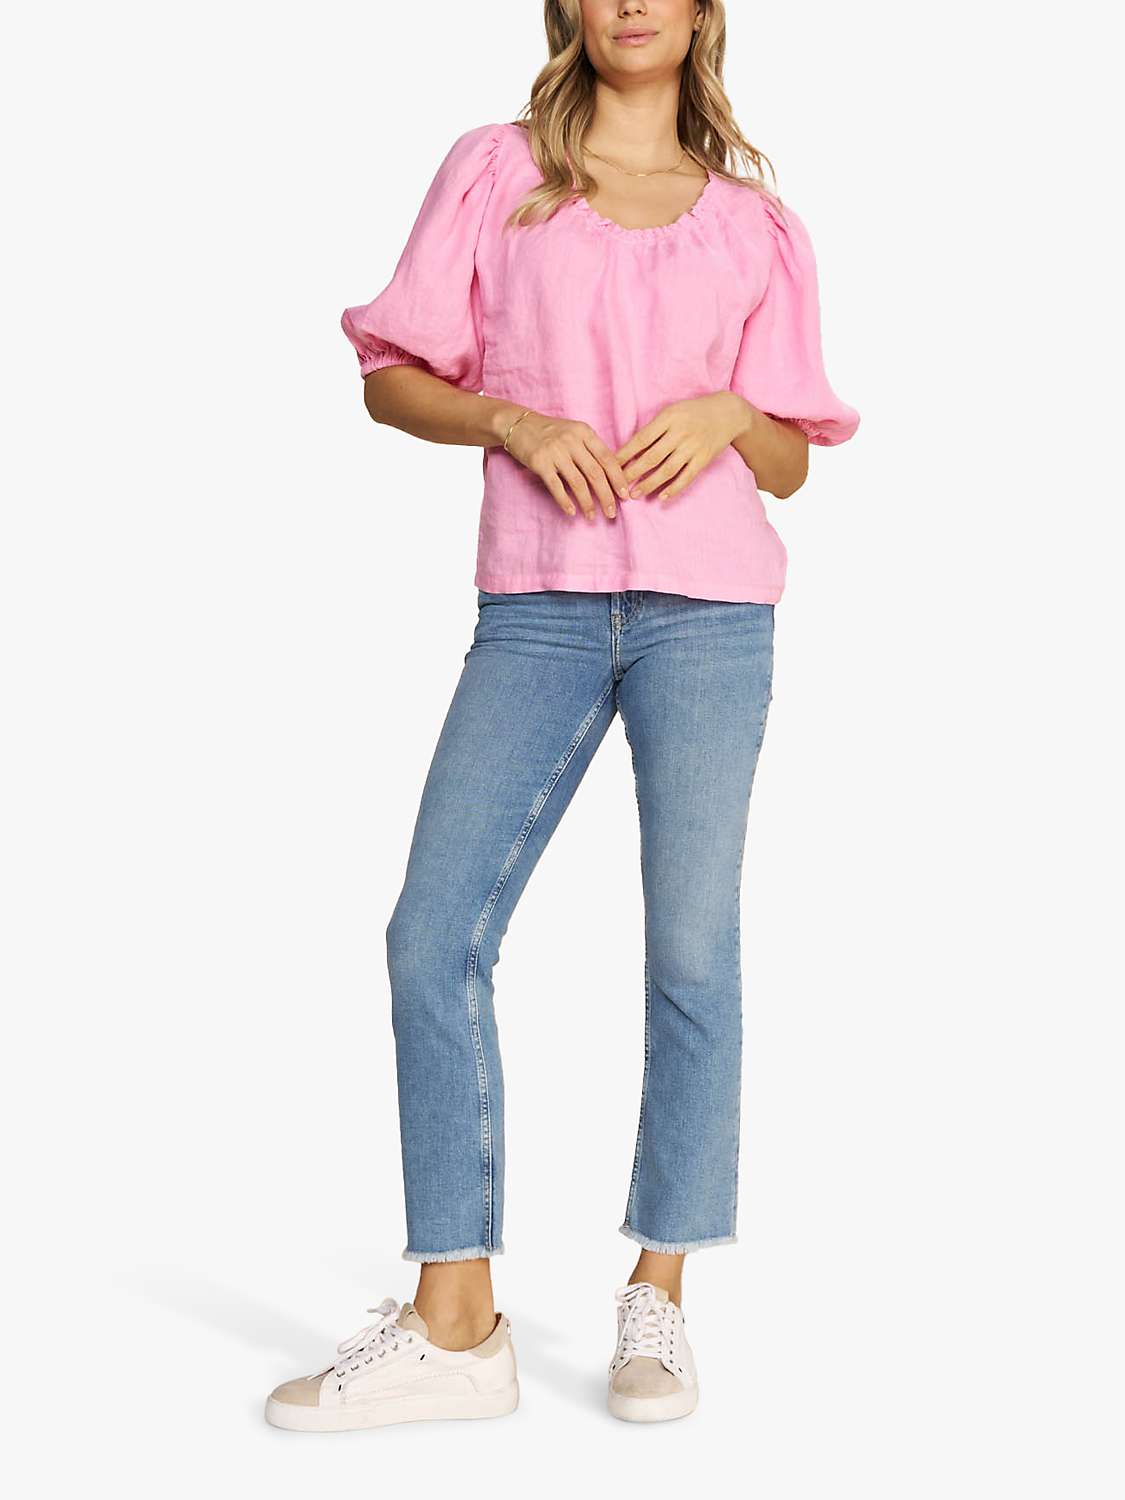 Buy MOS MOSH Ashley Mateos Flared Jeans, Blue Online at johnlewis.com